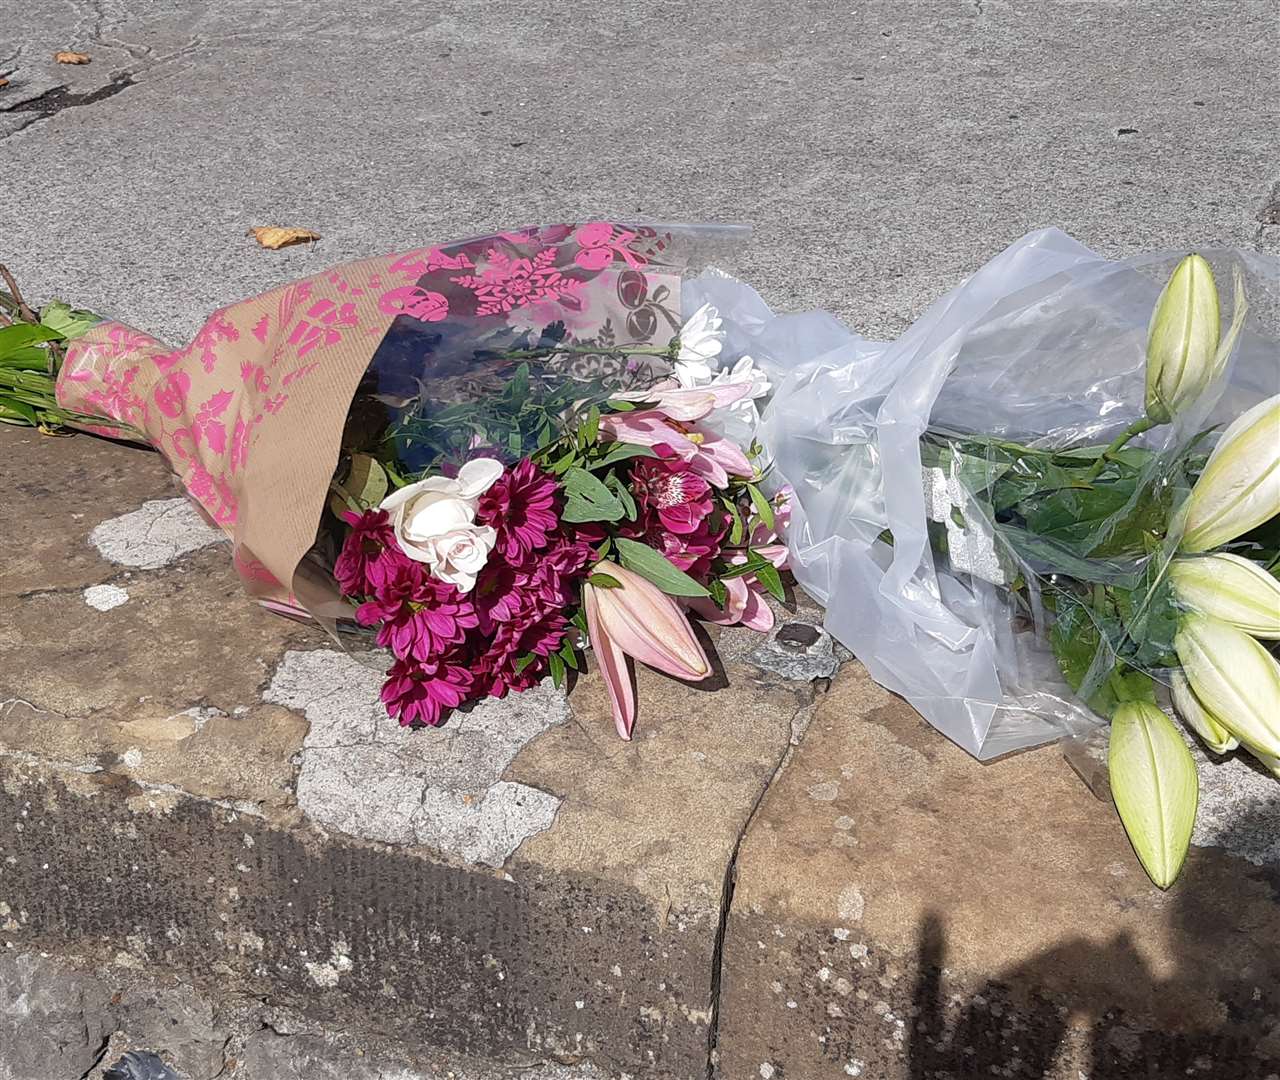 Floral tributes for the Queen have appeared opposite Rochester Castle. Photo: Sean Delaney